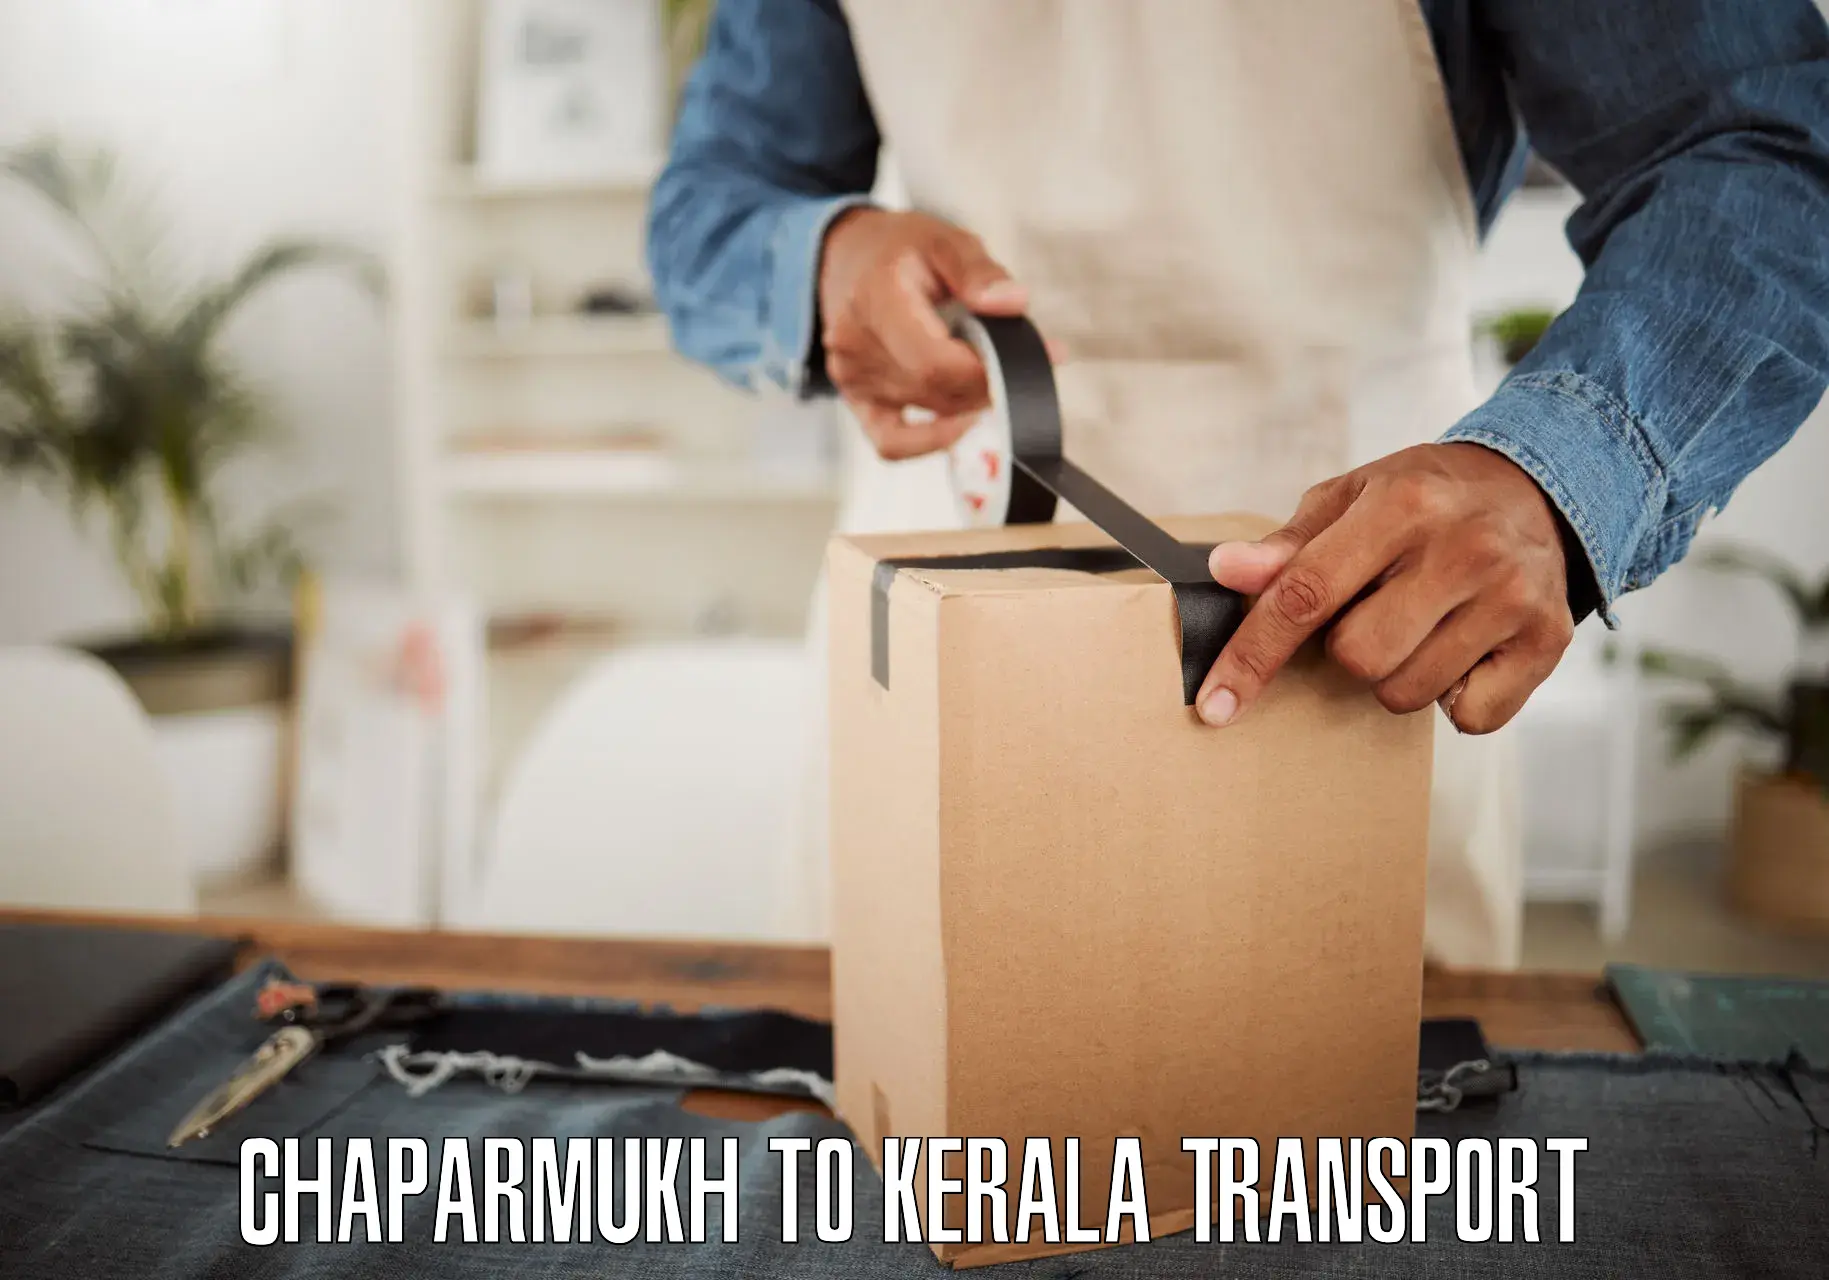 Vehicle transport services Chaparmukh to Ramankary